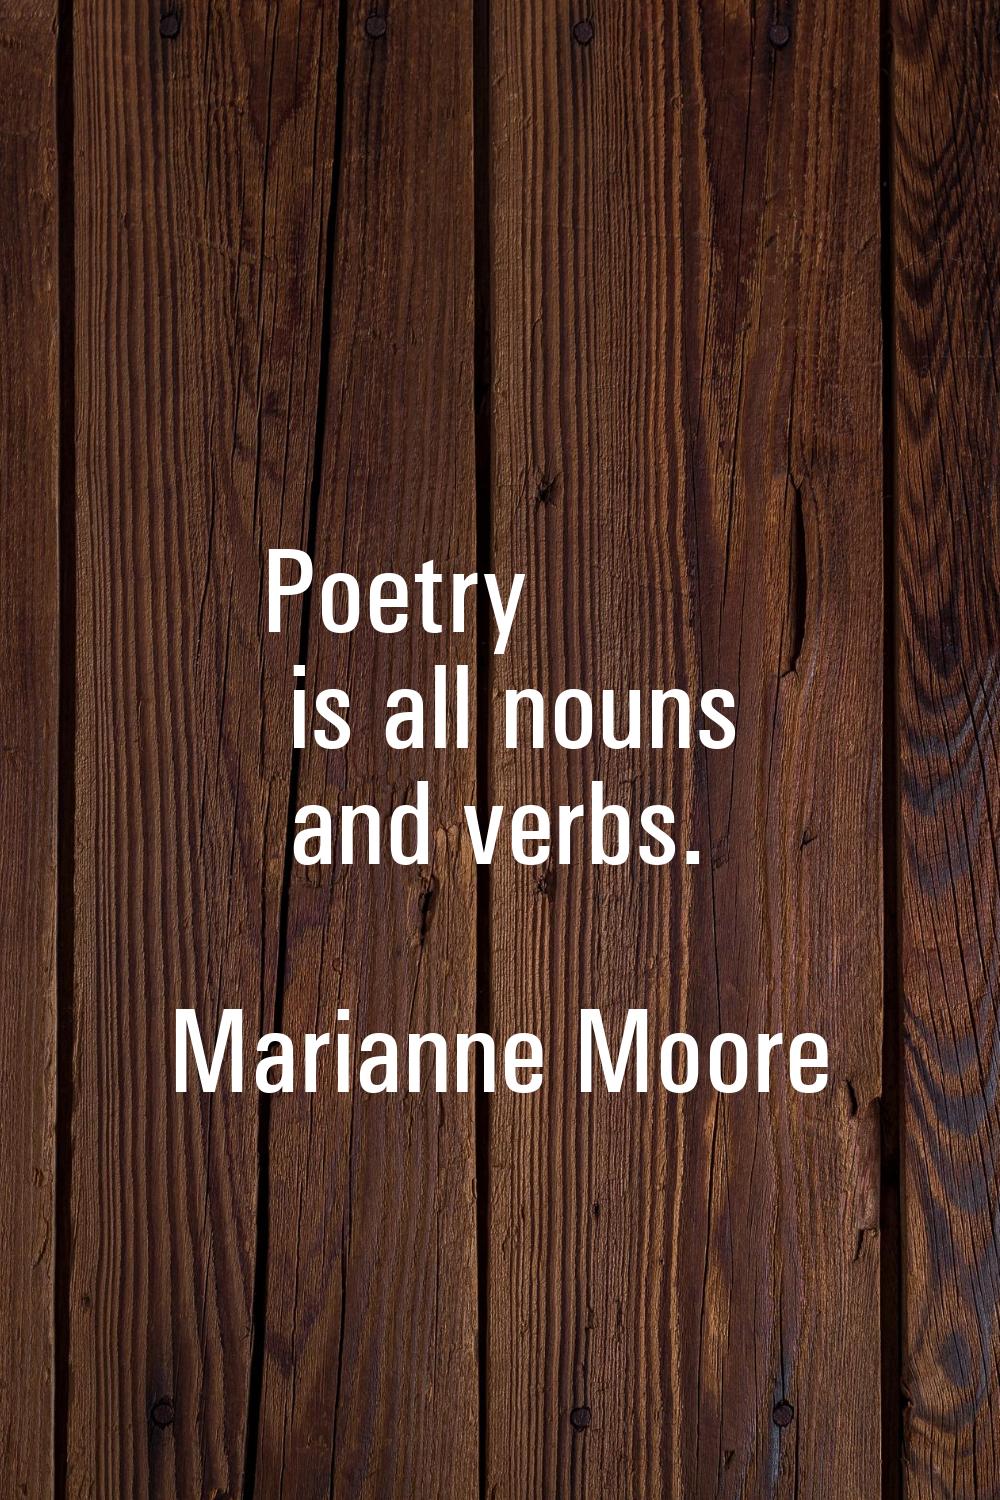 Poetry is all nouns and verbs.